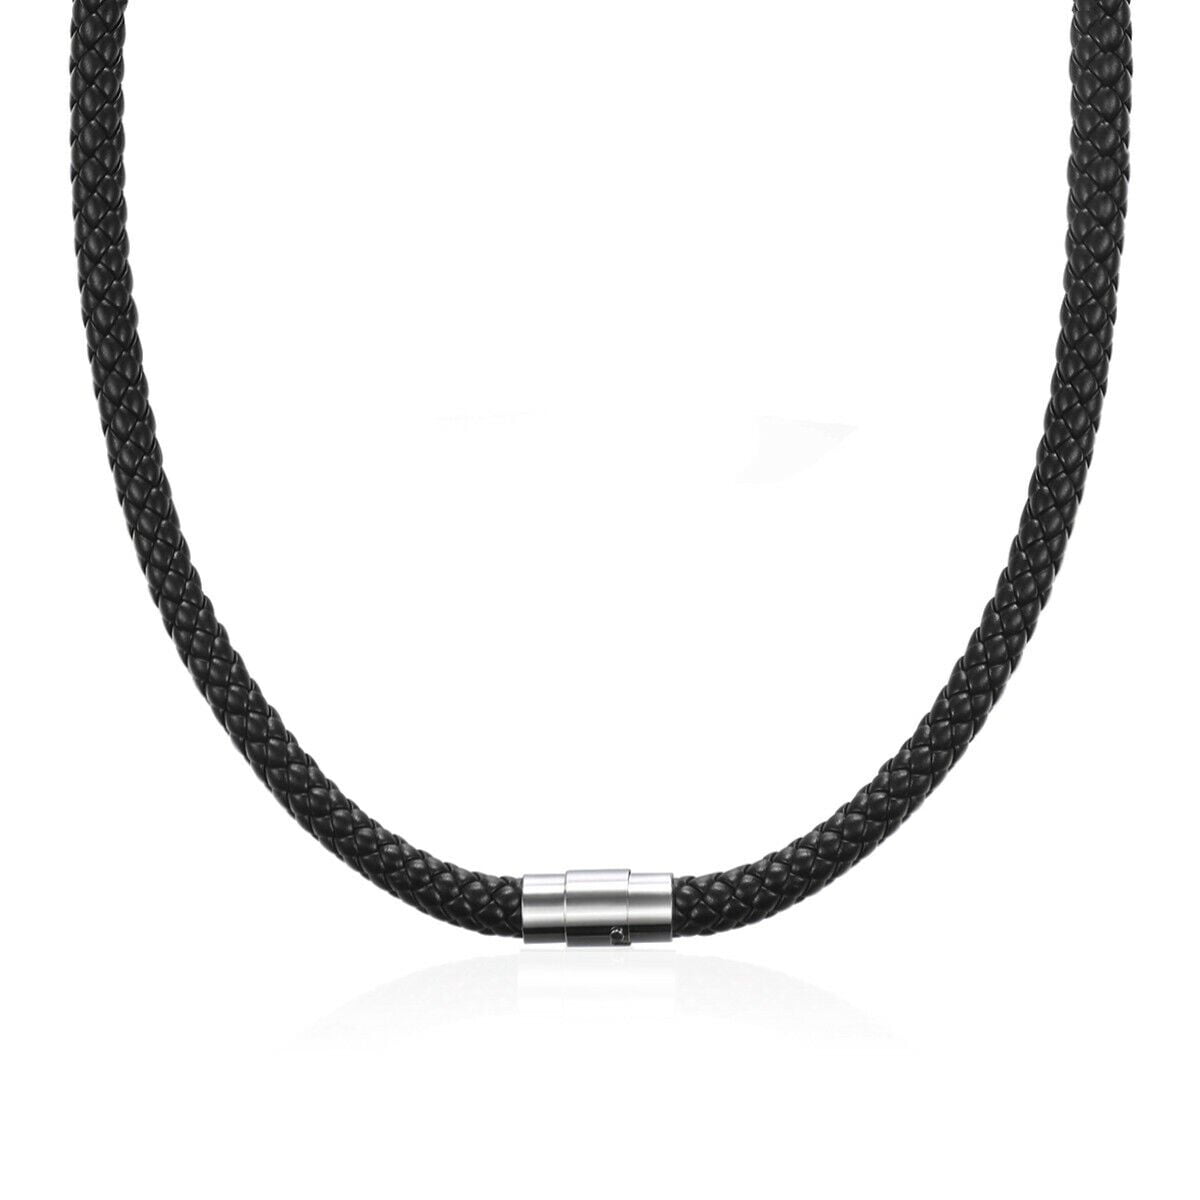 Mens Necklace Choker Brown Black Braided Cord Rope Artificial Leather  Necklace For Men Stainless Steel Clasp 4/6/8mm LUNM09